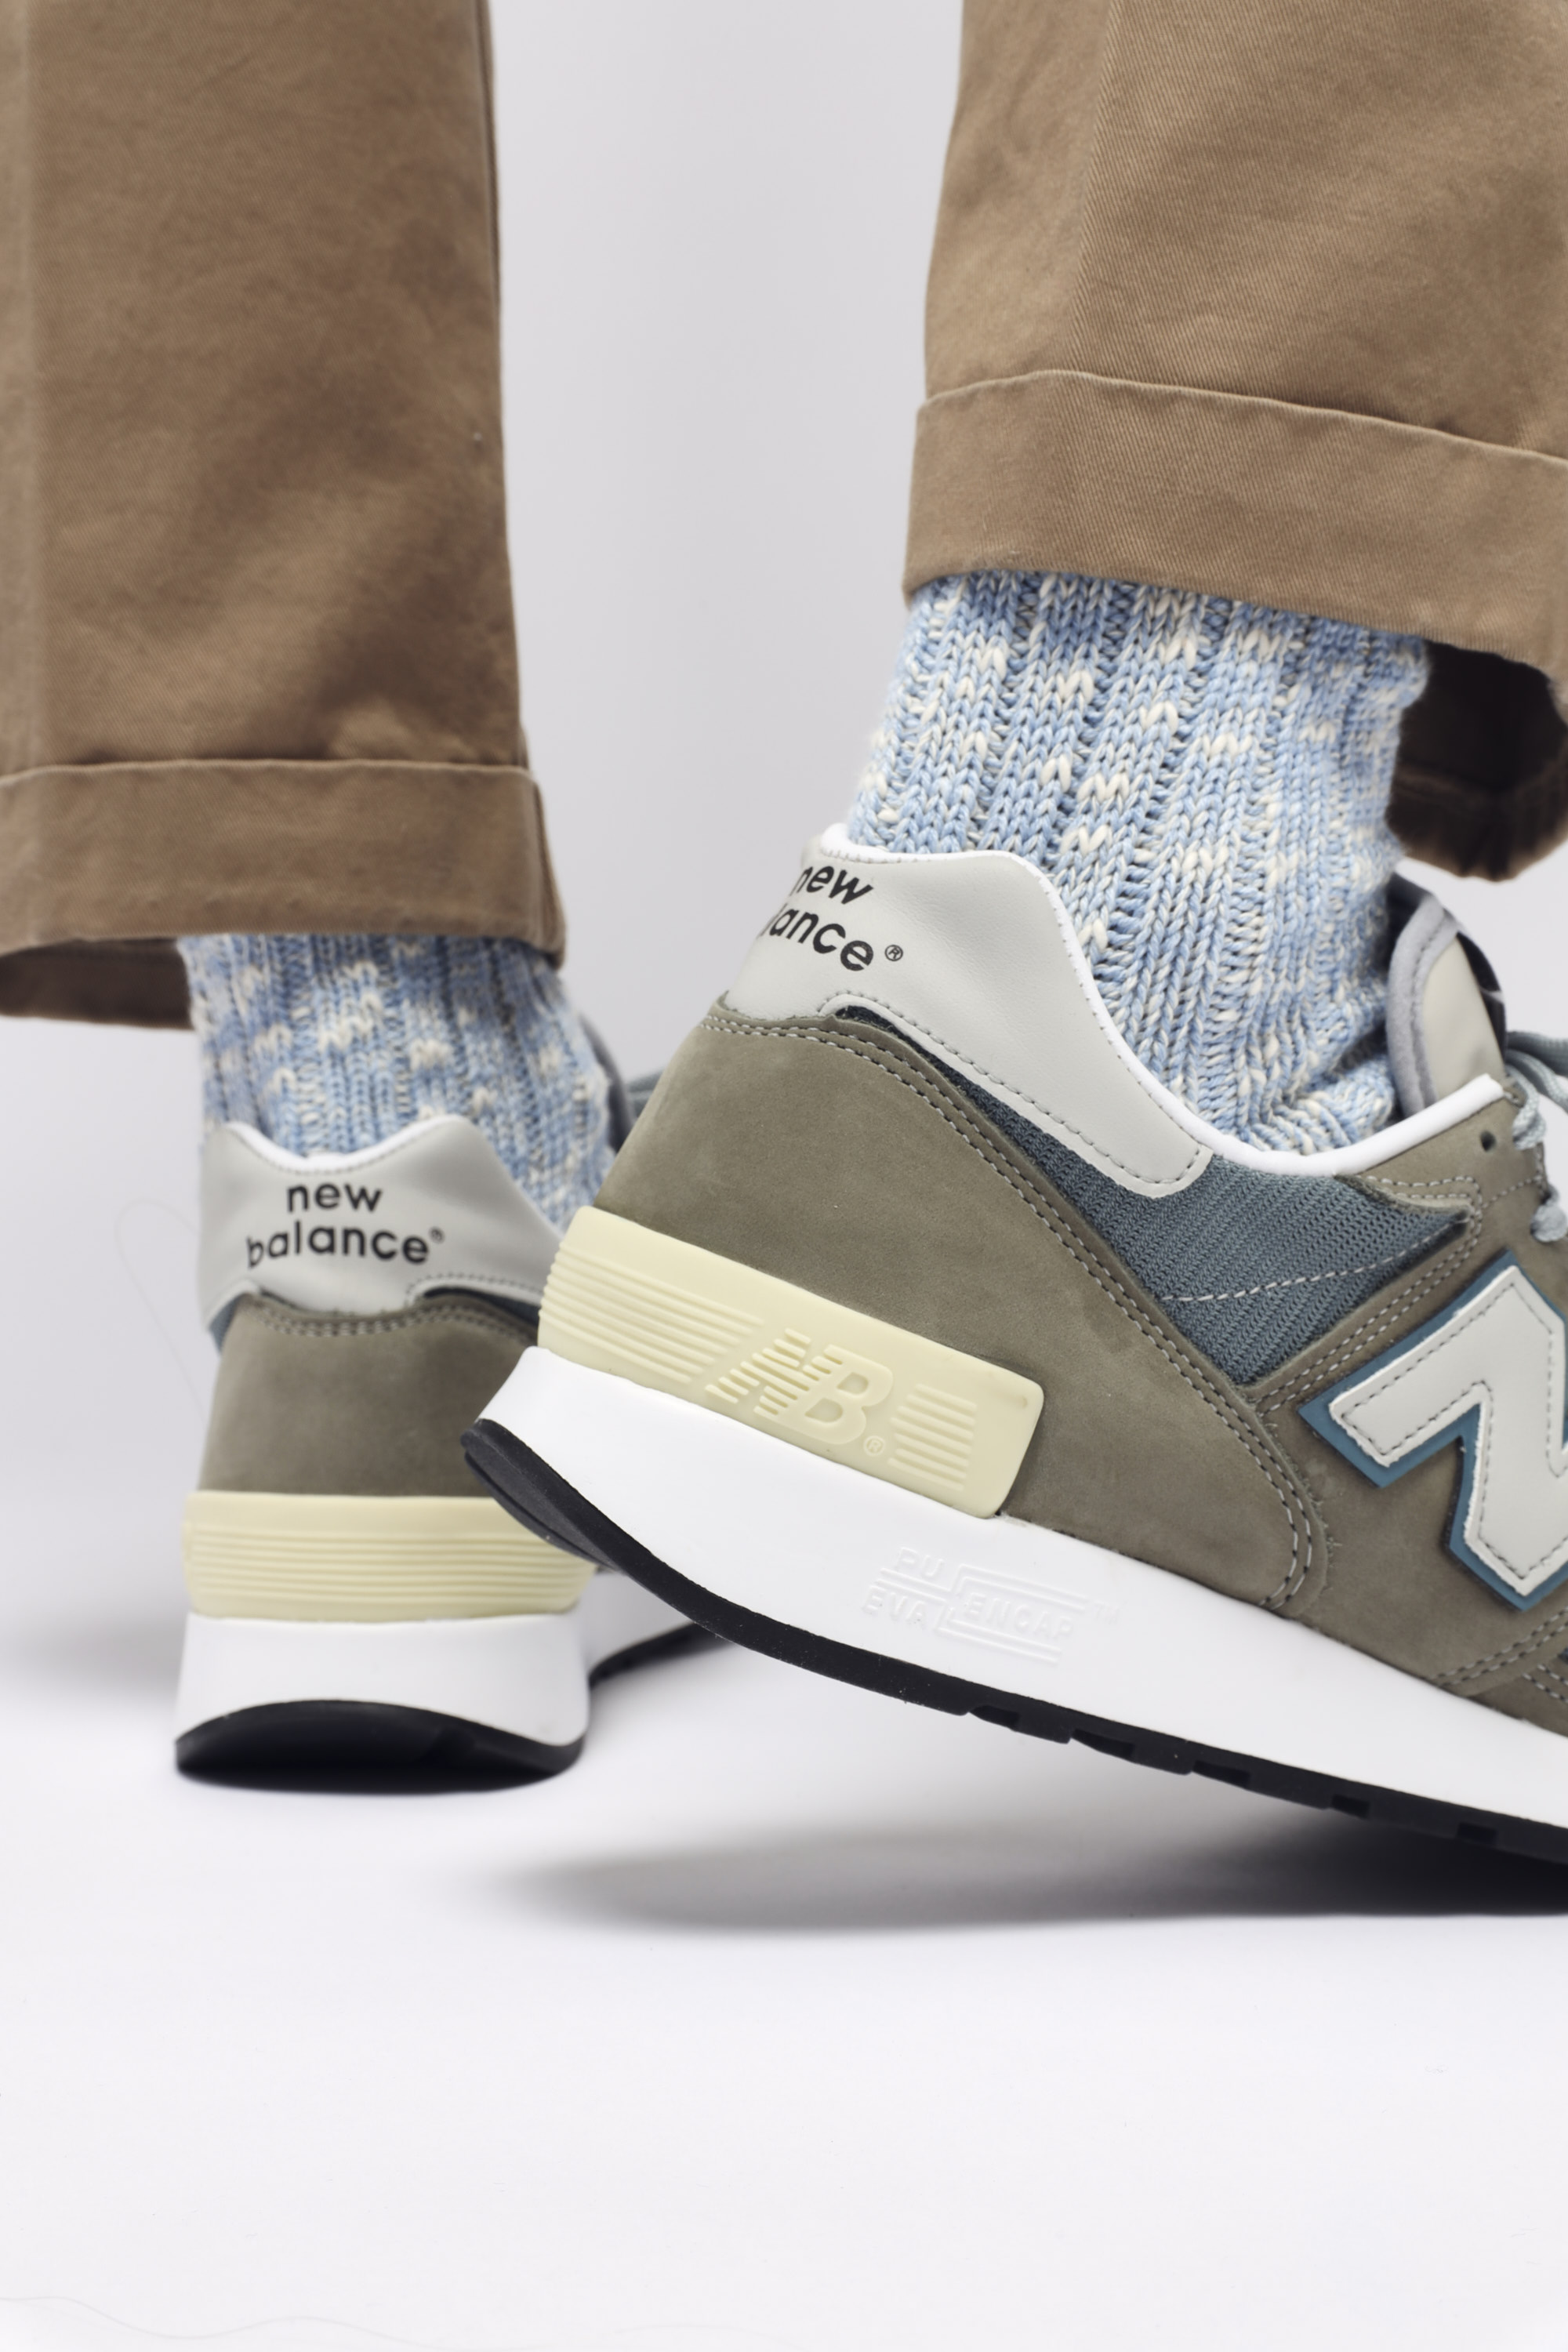 END. (US) Features | New Balance Revisit a Modern Classic With the 